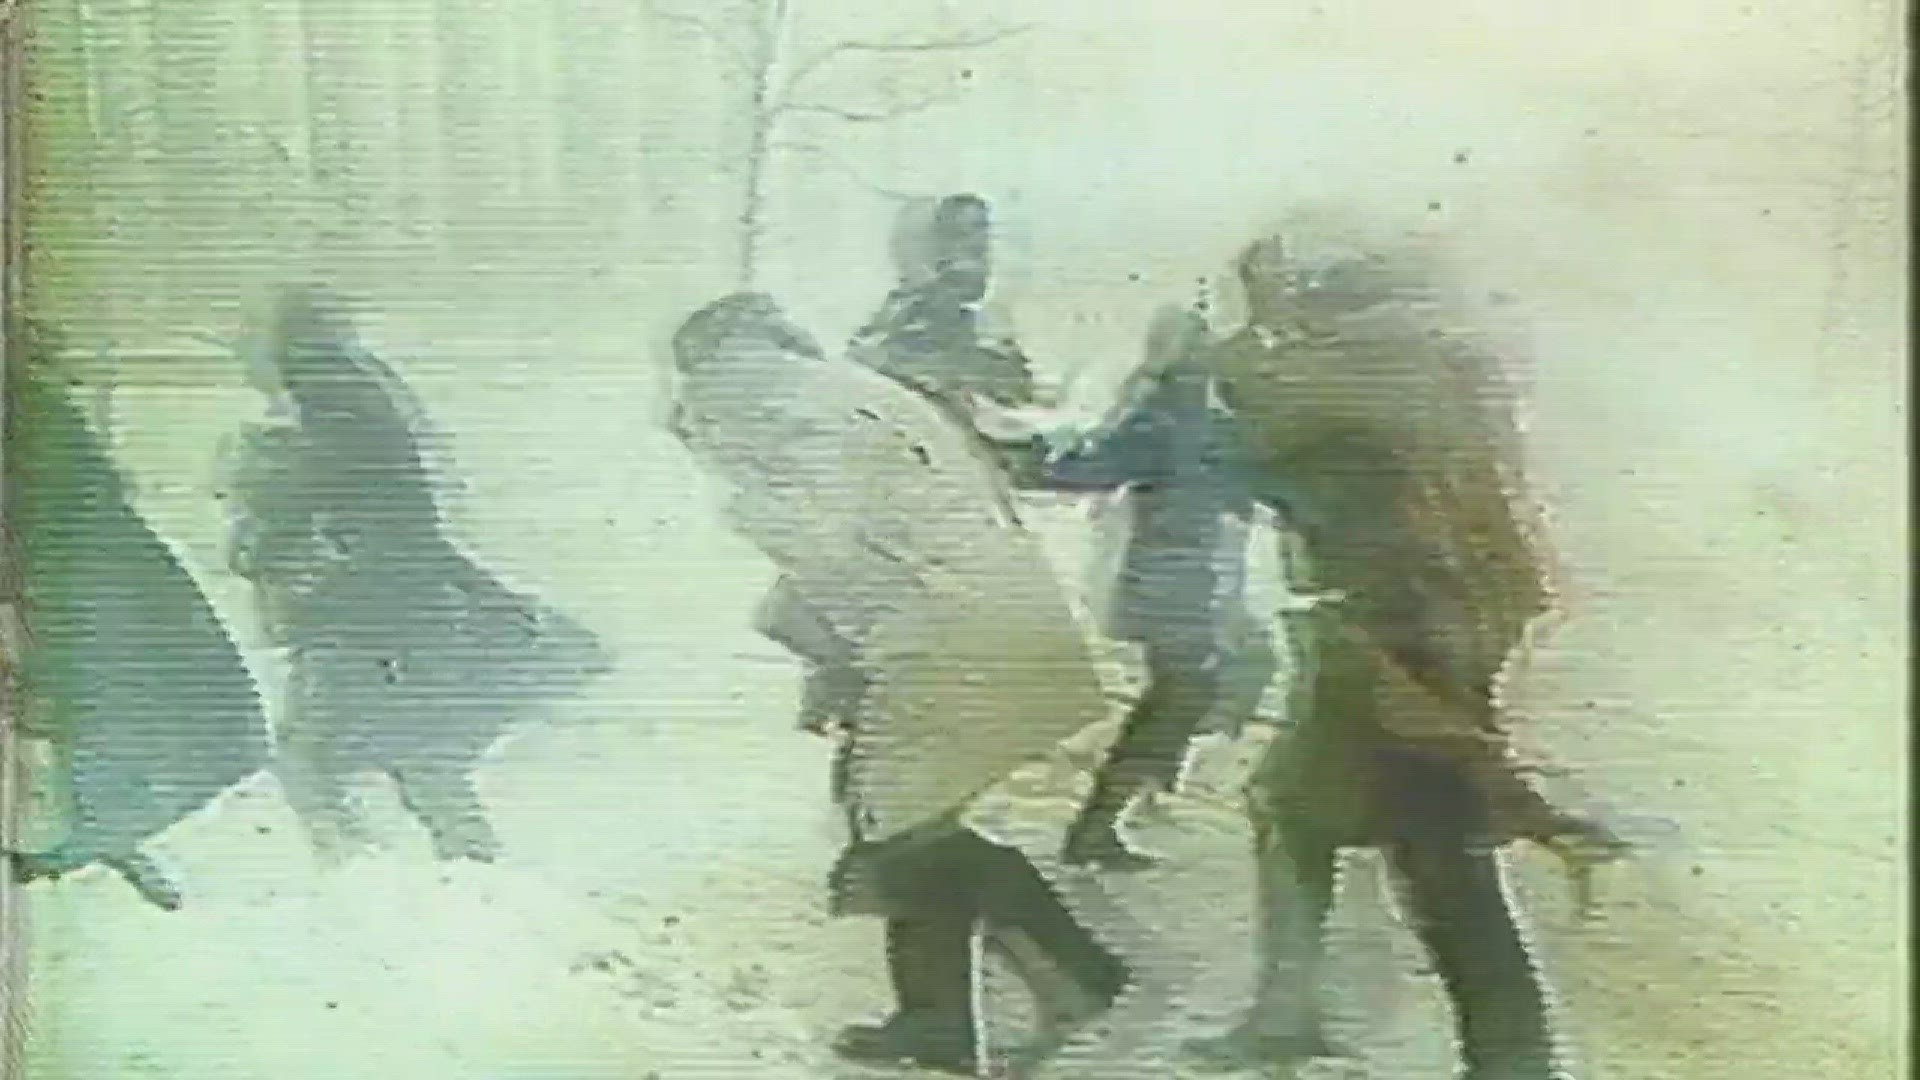 Dave McKinley looks back at the Blizzard of '77